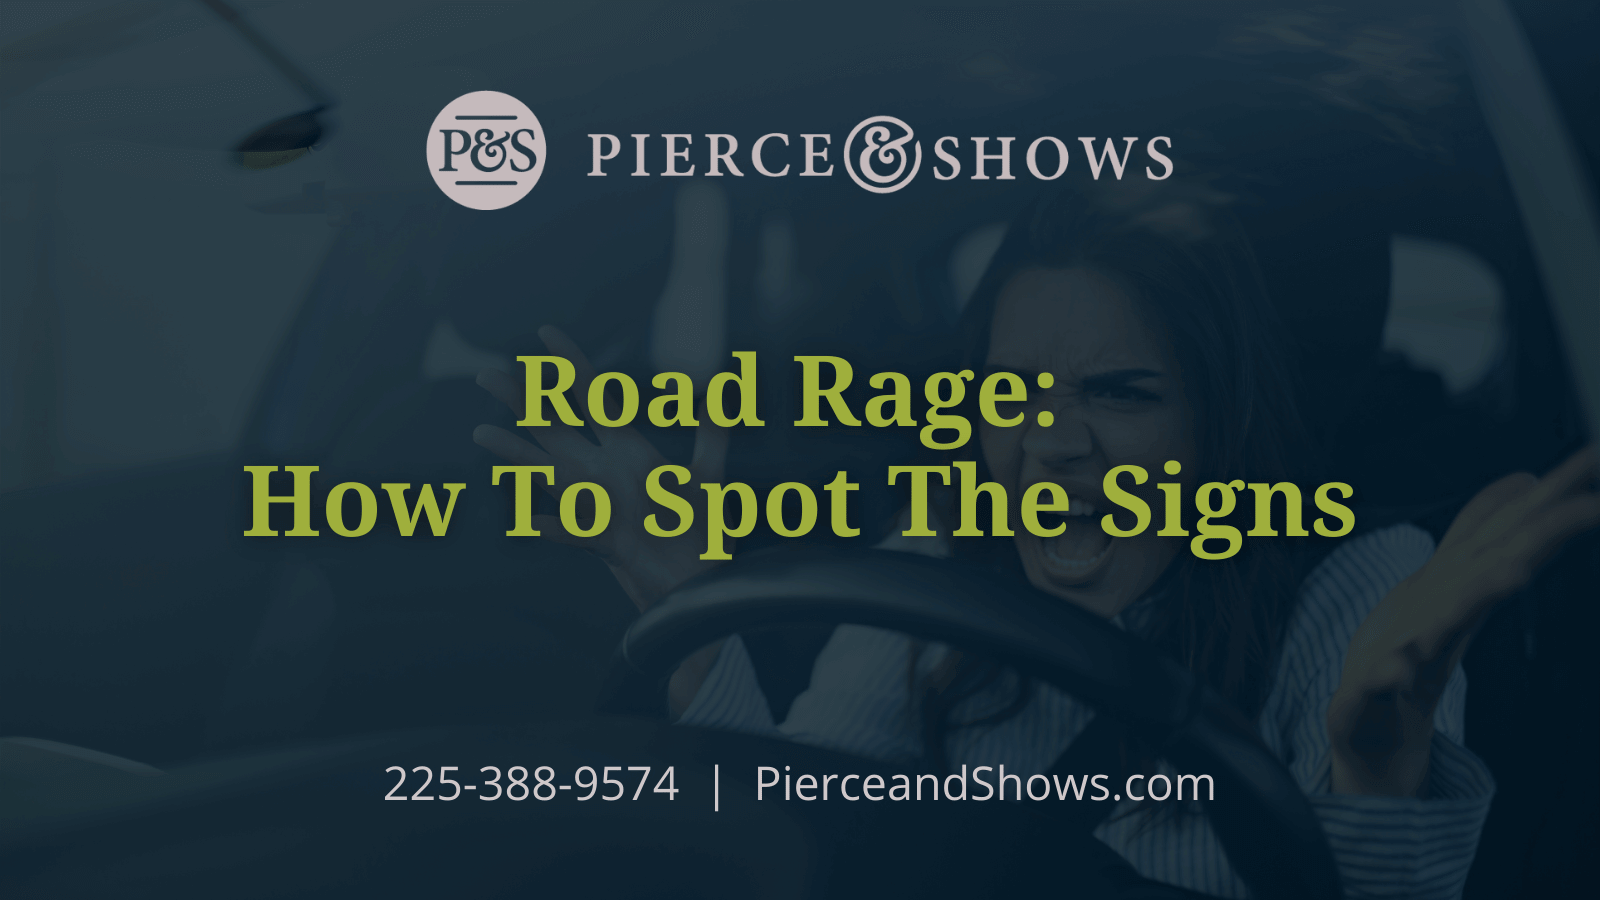 Road Rage How To Spot The Signs - Baton Rouge Louisiana injury attorney Pierce & Shows